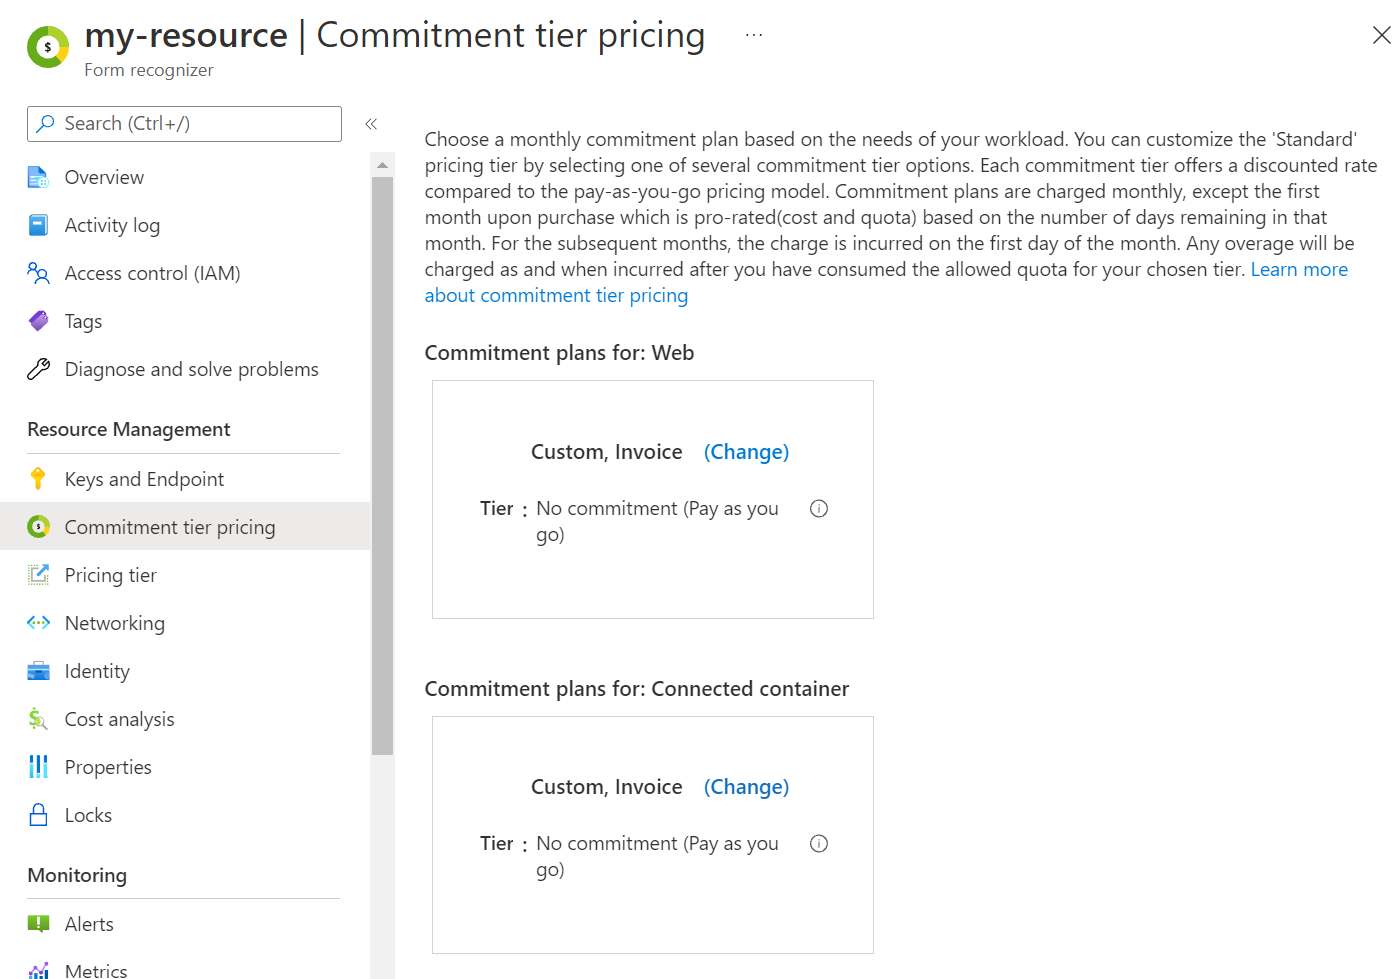 A screenshot showing the commitment tier pricing page on the Azure portal.